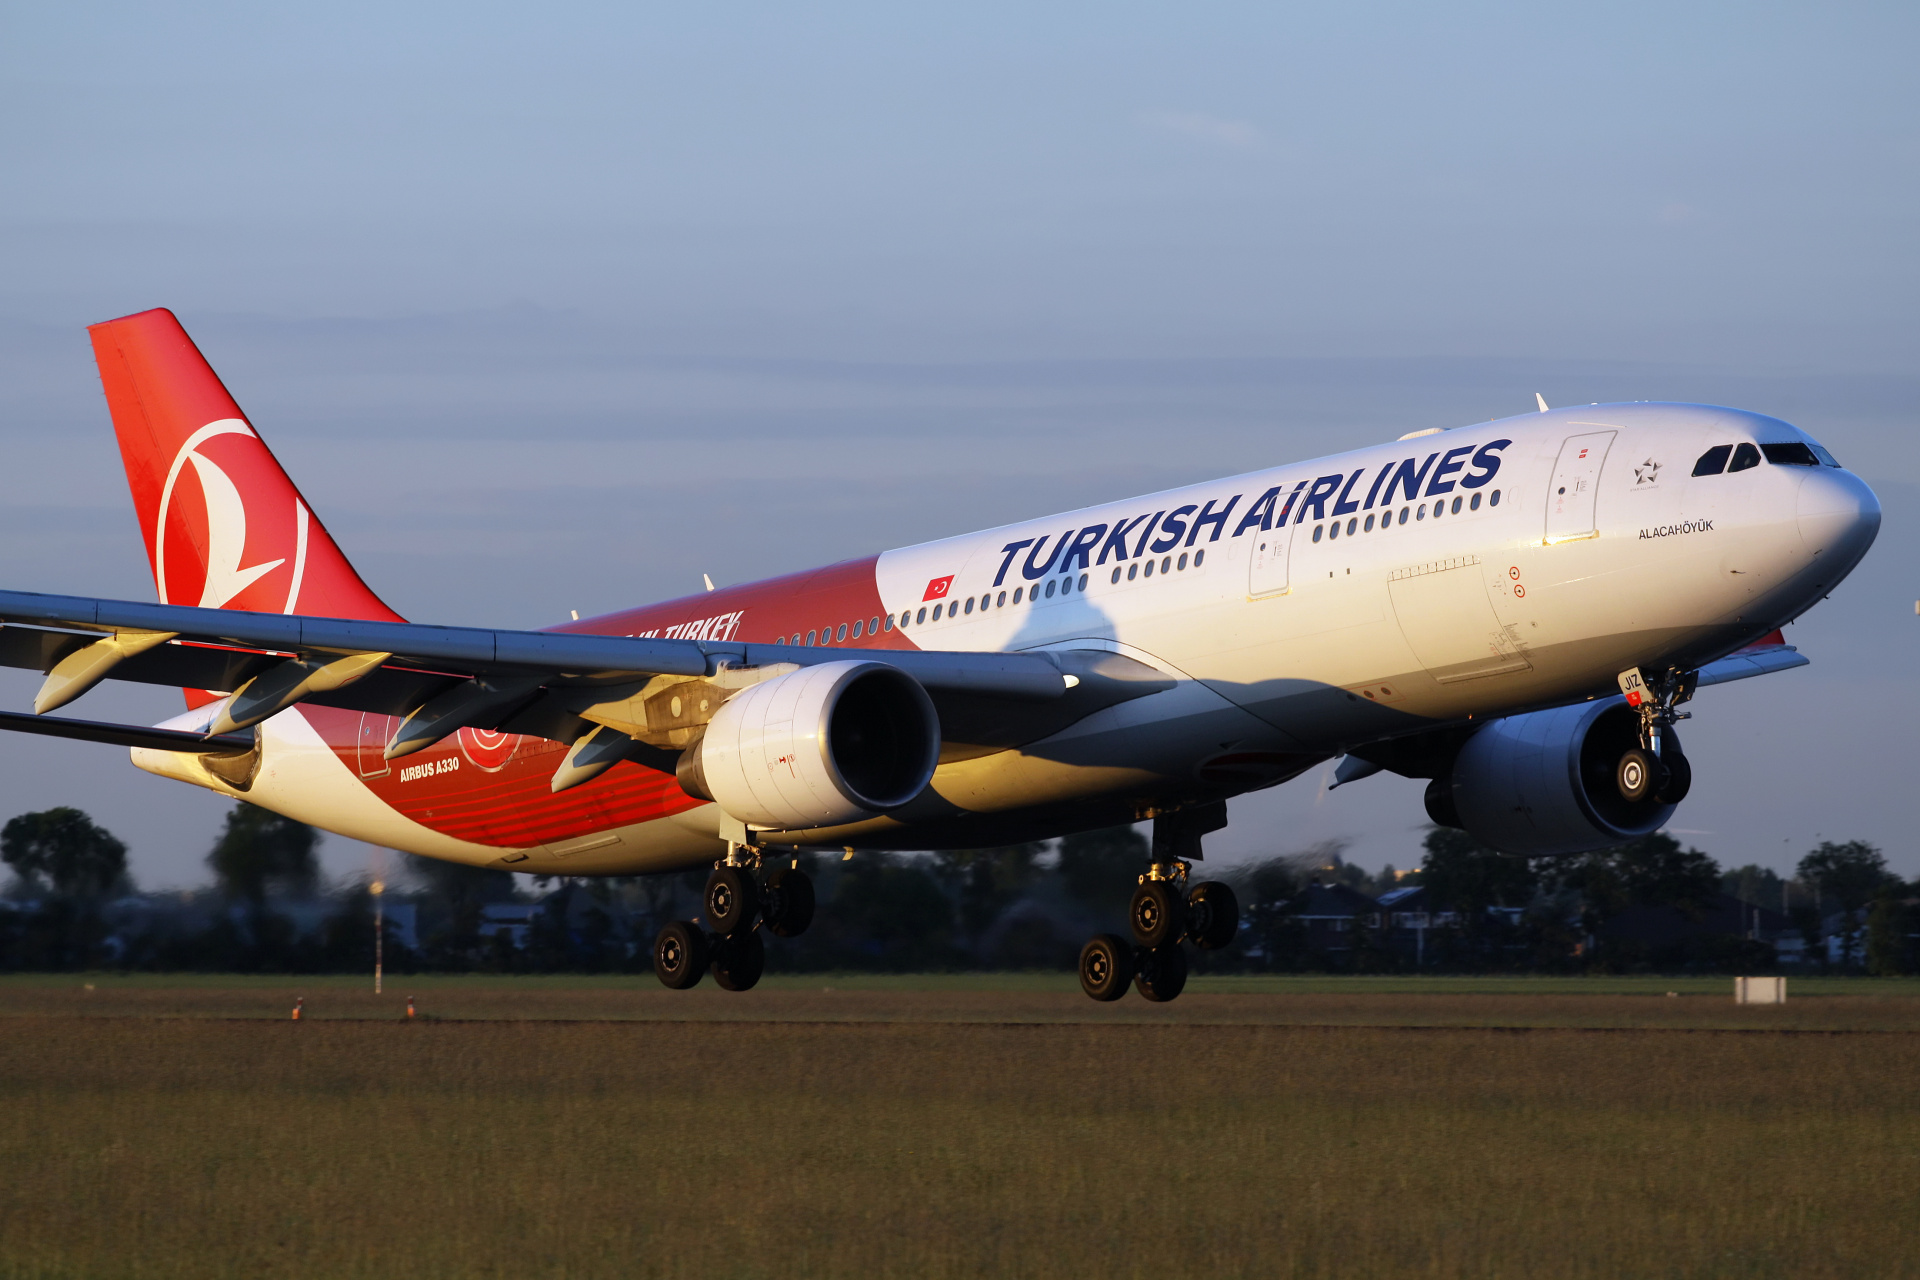 TC-JIZ (Invest in Turkey livery) (Aircraft » Schiphol Spotting » Airbus A330-200 » THY Turkish Airlines)